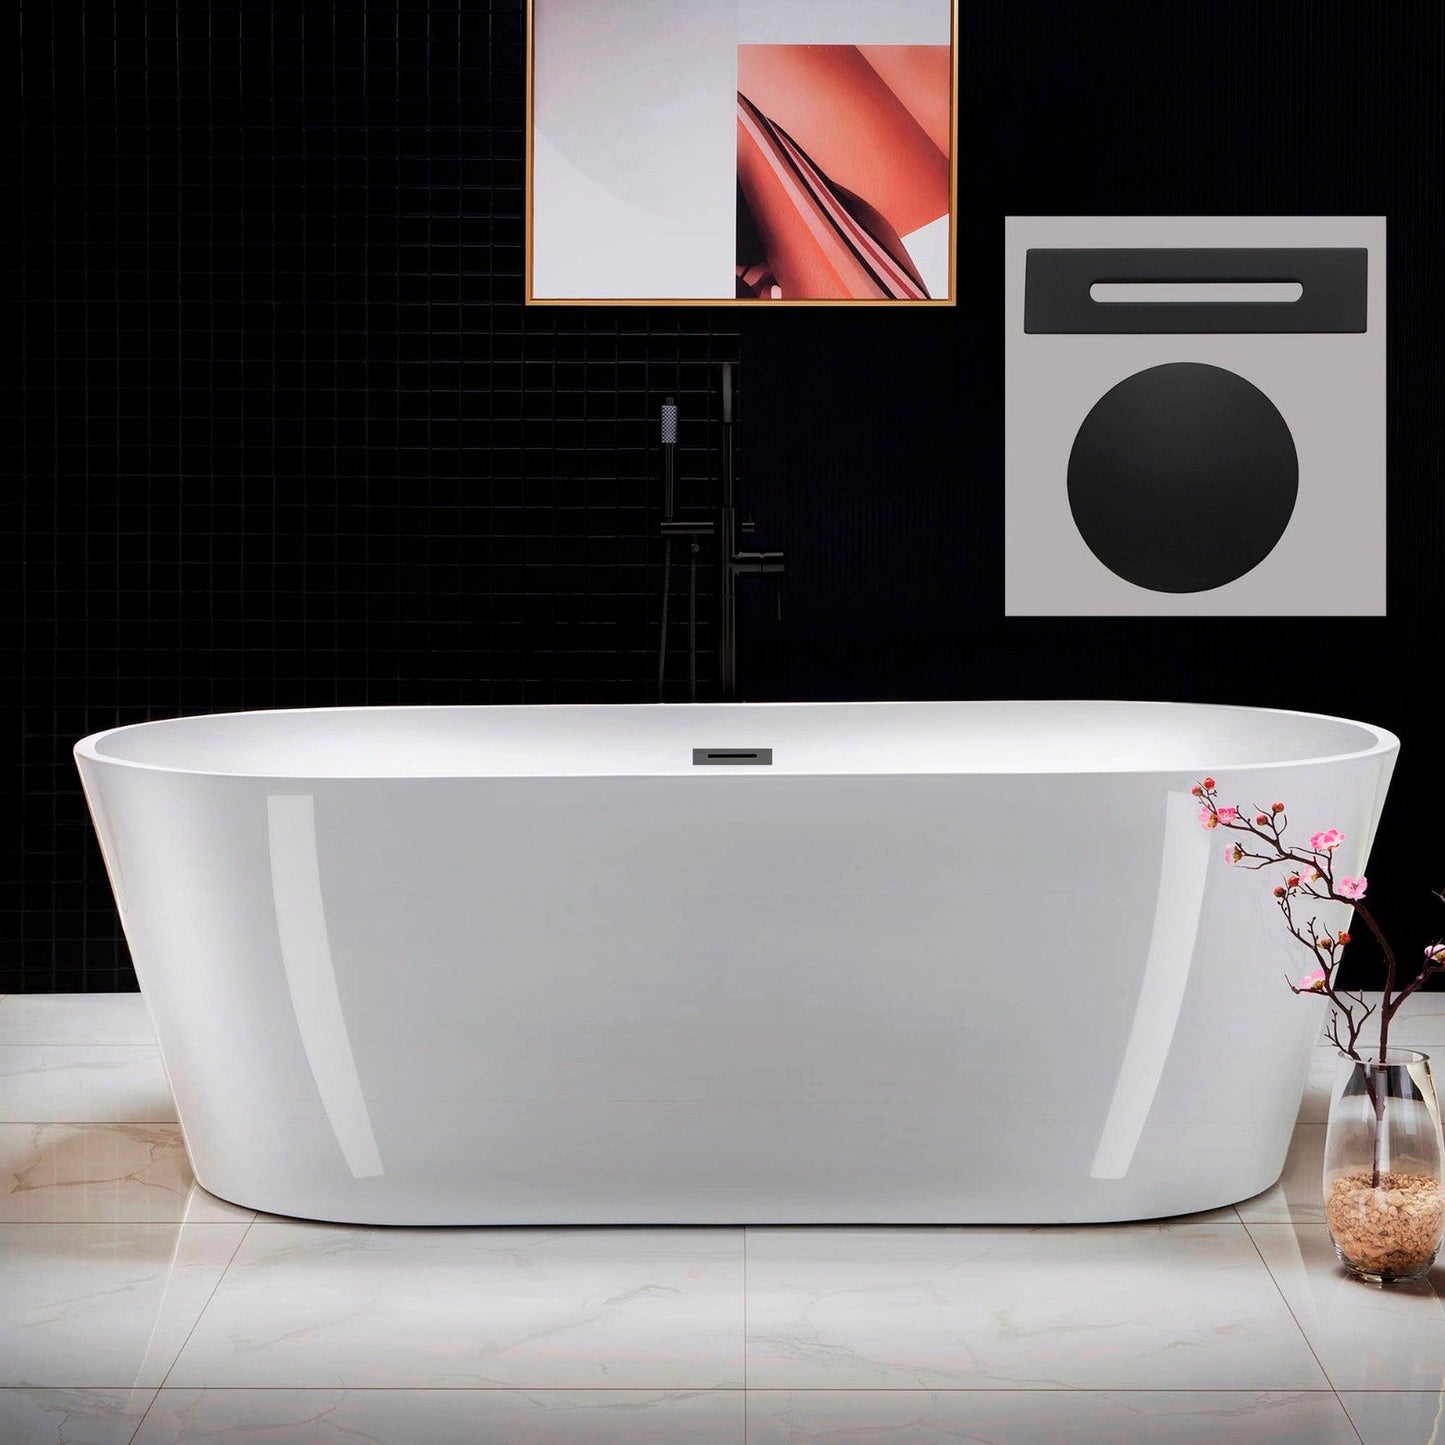 WoodBridge 71" White Acrylic Freestanding Contemporary Soaking Bathtub With Matte Black Drain, Overflow, F0009 Tub Filler and Caddy Tray